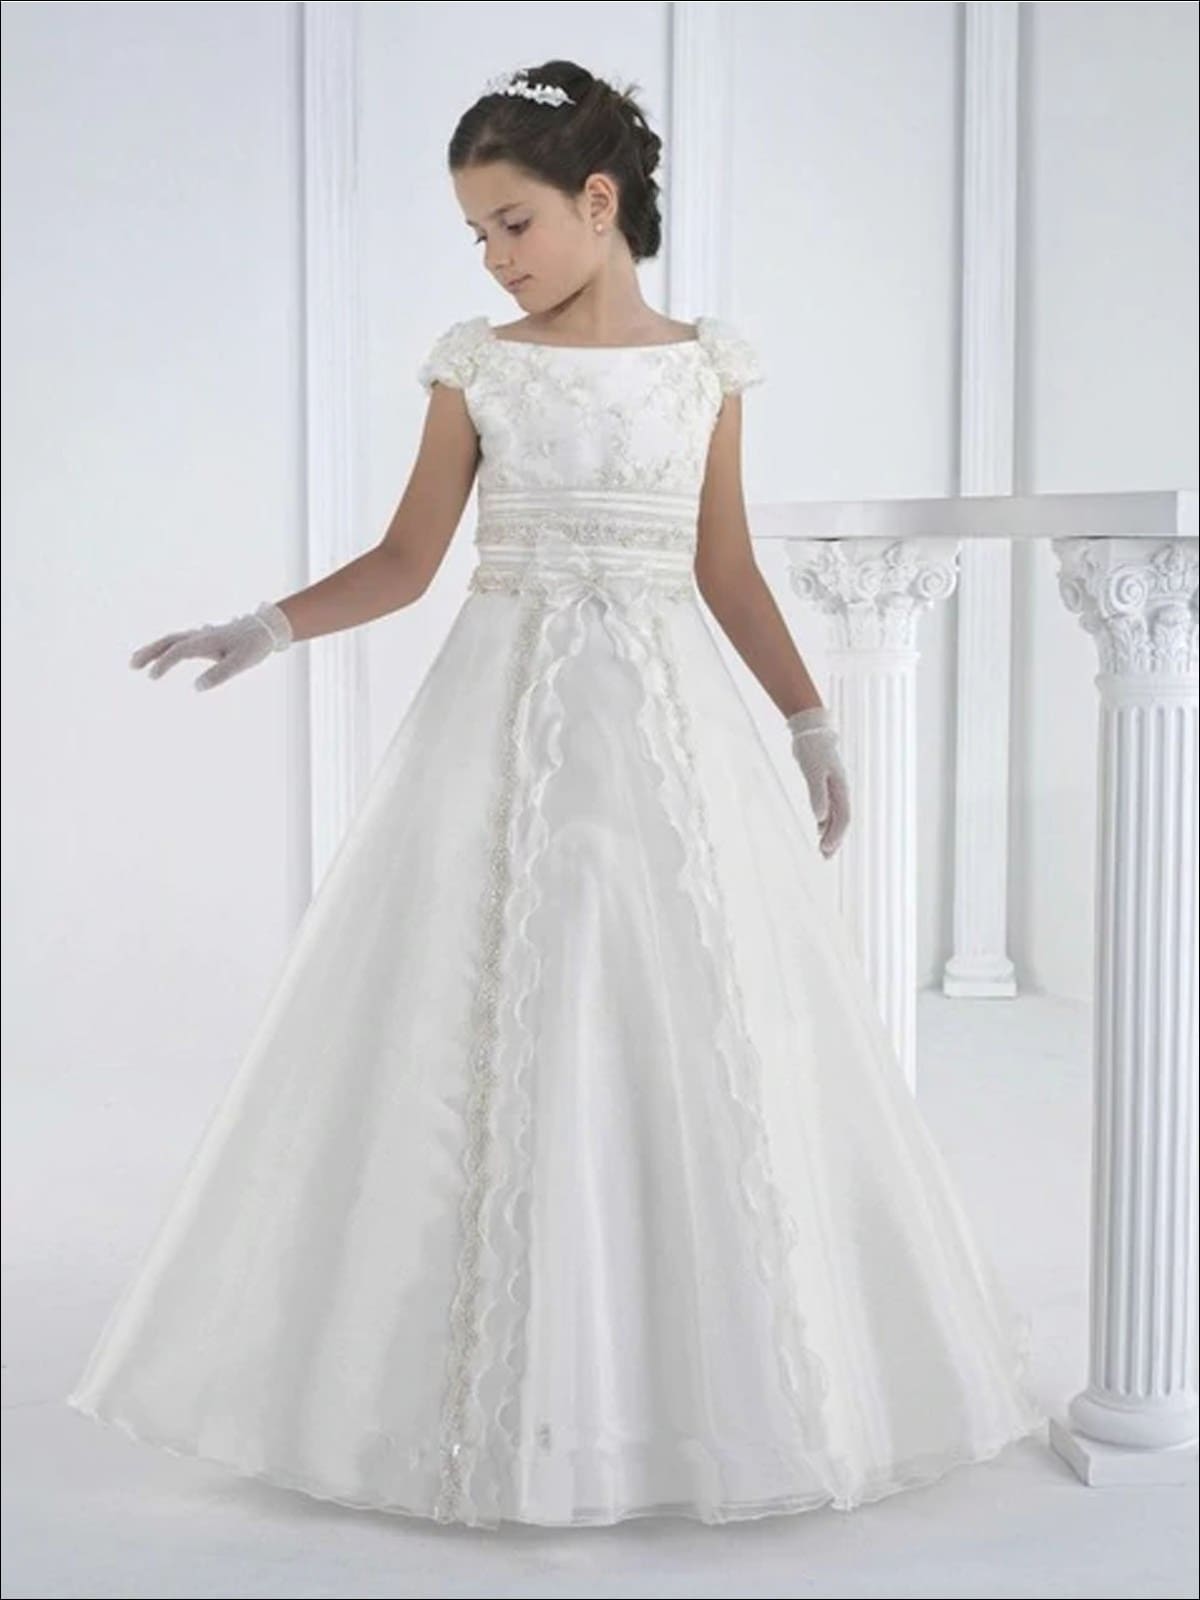 New! Enchanting Flower Girl Dresses – A Little Lacey